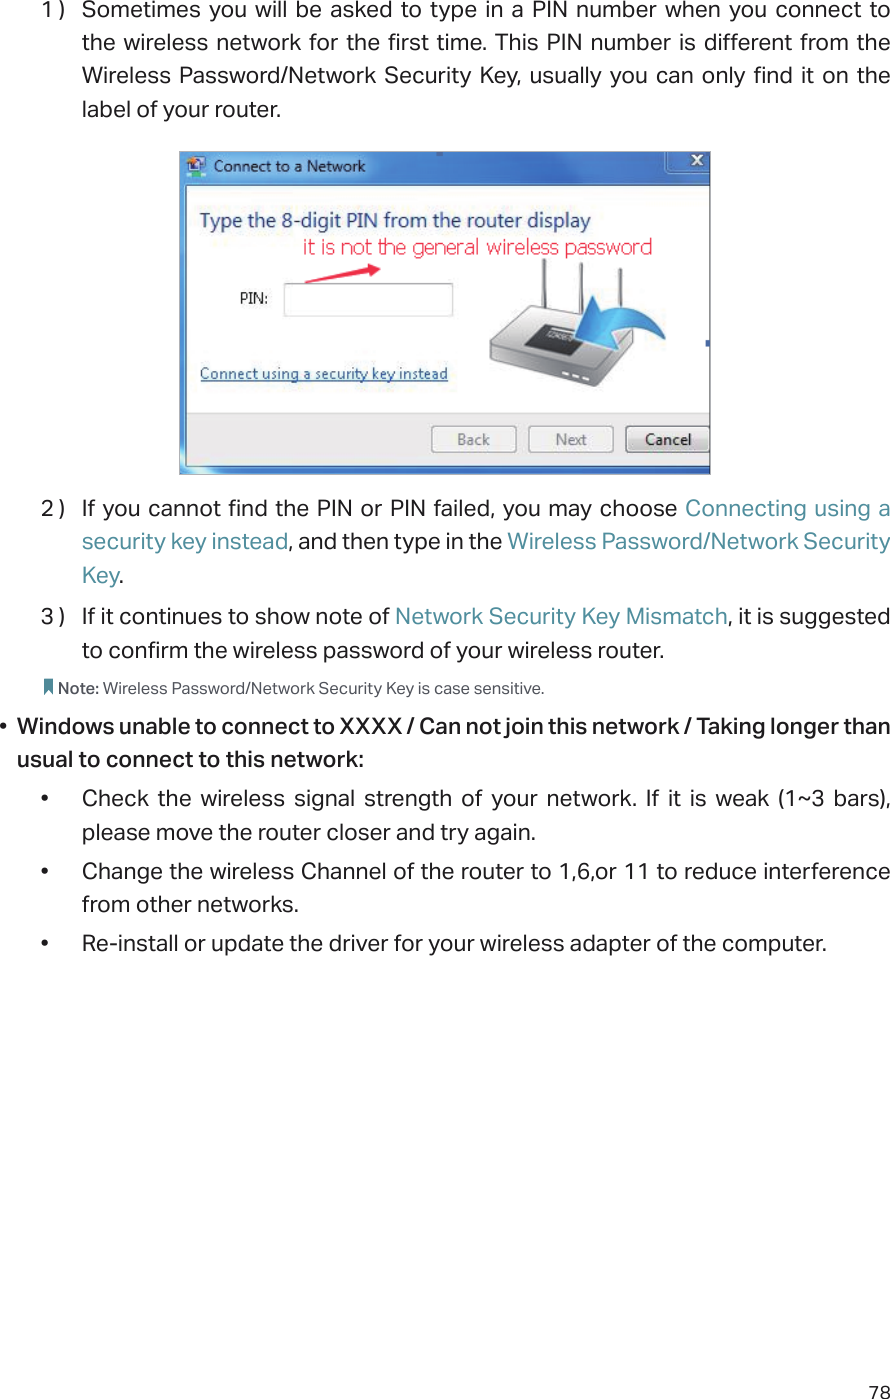 781 )  Sometimes you will be asked to type in a PIN number when you connect to the wireless network for the first time. This PIN number is different from the Wireless Password/Network Security Key, usually you can only find it on the label of your router.2 )  If you cannot find the PIN or PIN failed, you may choose Connecting using a security key instead, and then type in the Wireless Password/Network Security Key.3 )  If it continues to show note of Network Security Key Mismatch, it is suggested to confirm the wireless password of your wireless router.  Note: Wireless Password/Network Security Key is case sensitive.•  Windows unable to connect to XXXX / Can not join this network / Taking longer than usual to connect to this network:•  Check the wireless signal strength of your network. If it is weak (1~3 bars), please move the router closer and try again.•  Change the wireless Channel of the router to 1,6,or 11 to reduce interference from other networks.•  Re-install or update the driver for your wireless adapter of the computer.